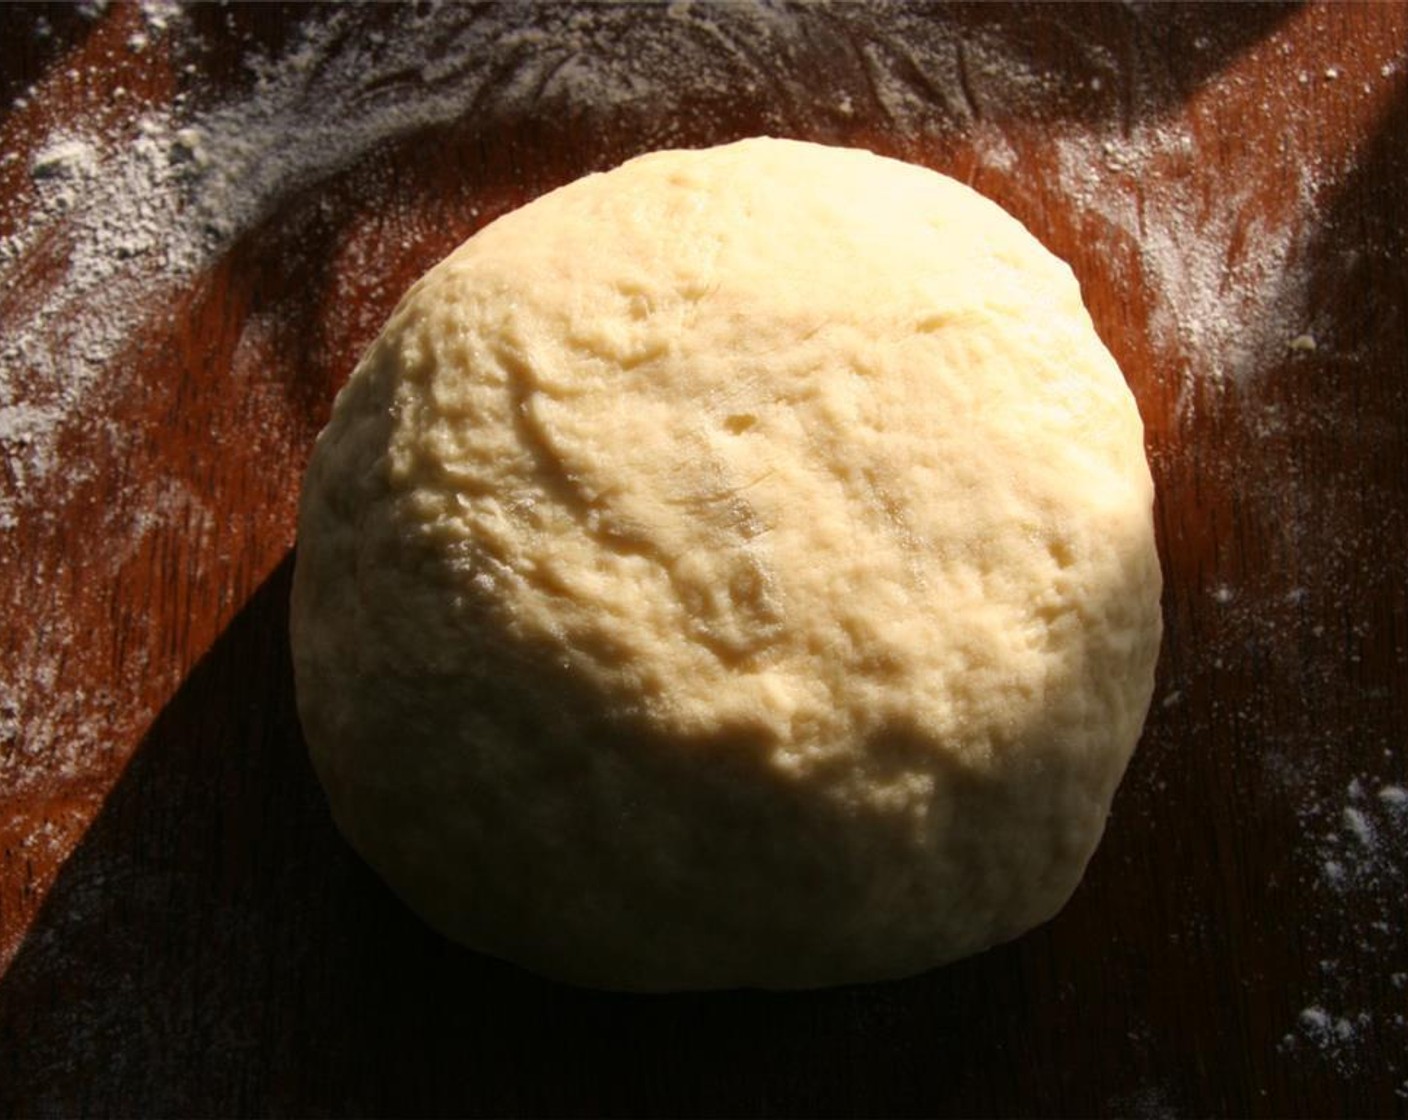 step 5 Add 1/3 cup of the reserved cooking liquid and add the Unbleached All Purpose Flour (2 1/2 cups), a little at a time, to form a dough. Turn the soft, moist dough out onto a lightly floured work surface. Knead until the dough feels smooth and elastic, about 5 minutes.